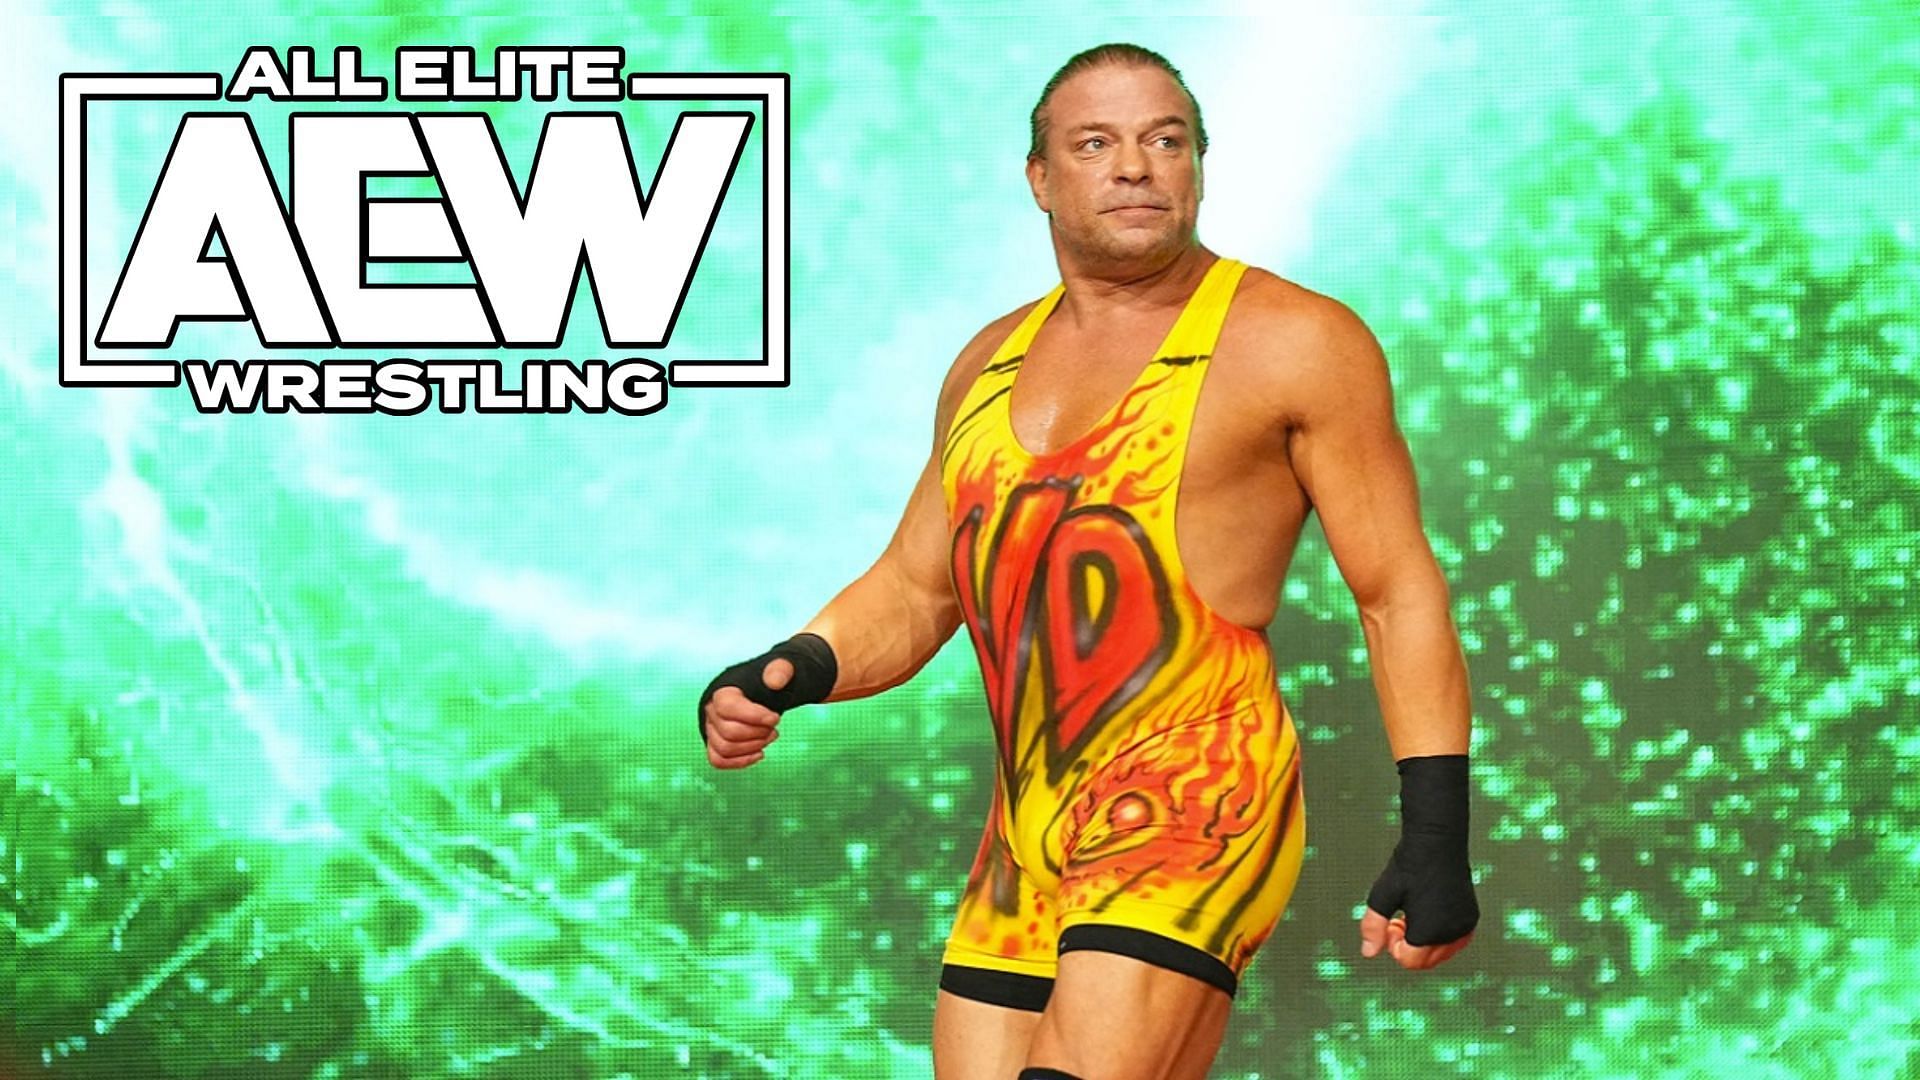 Was RVD warmly received by the AEW locker room?